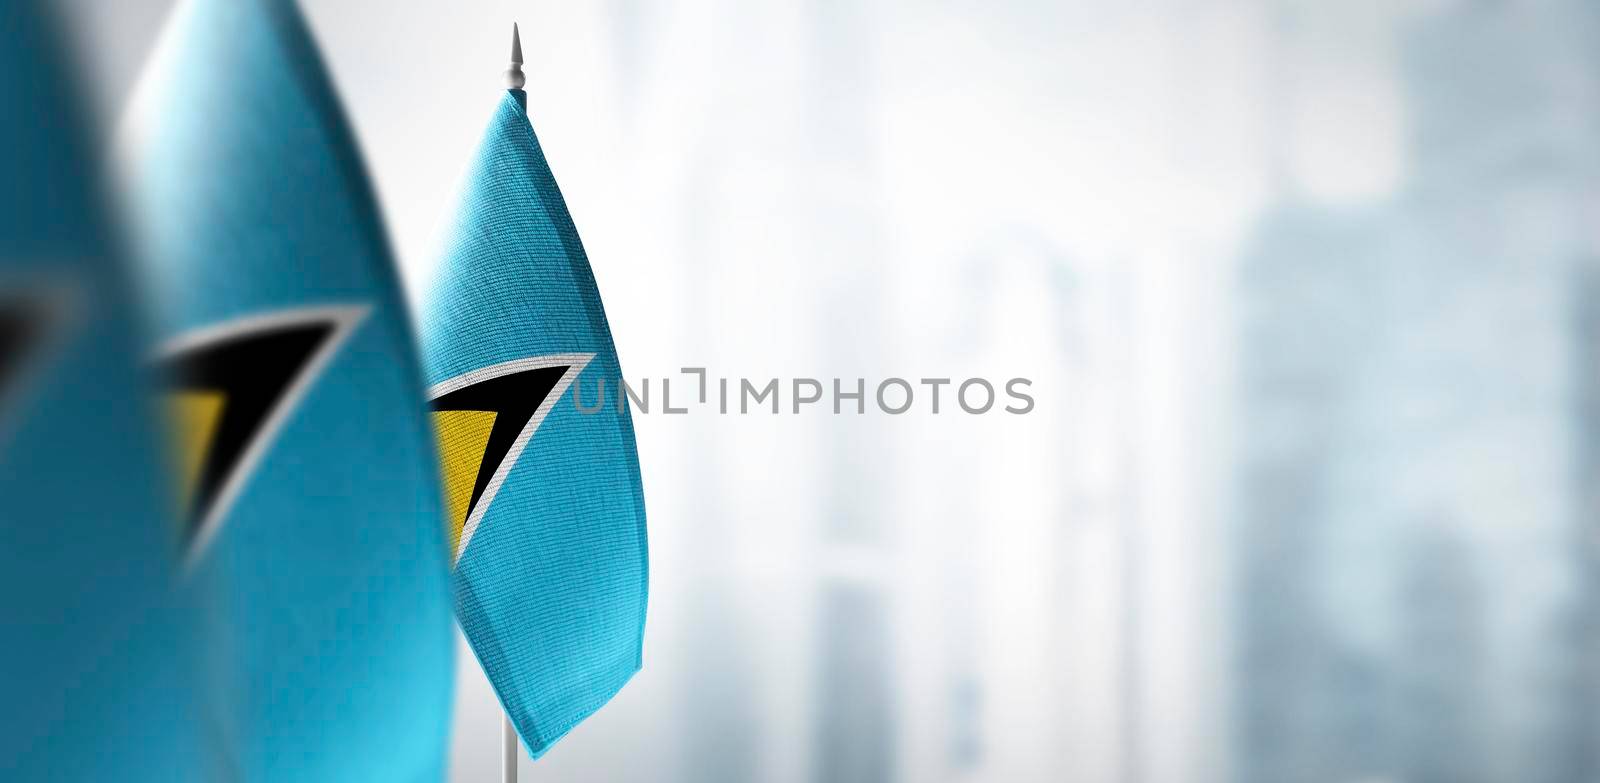 Small flags of Saint Lucia on a blurry background of the city.